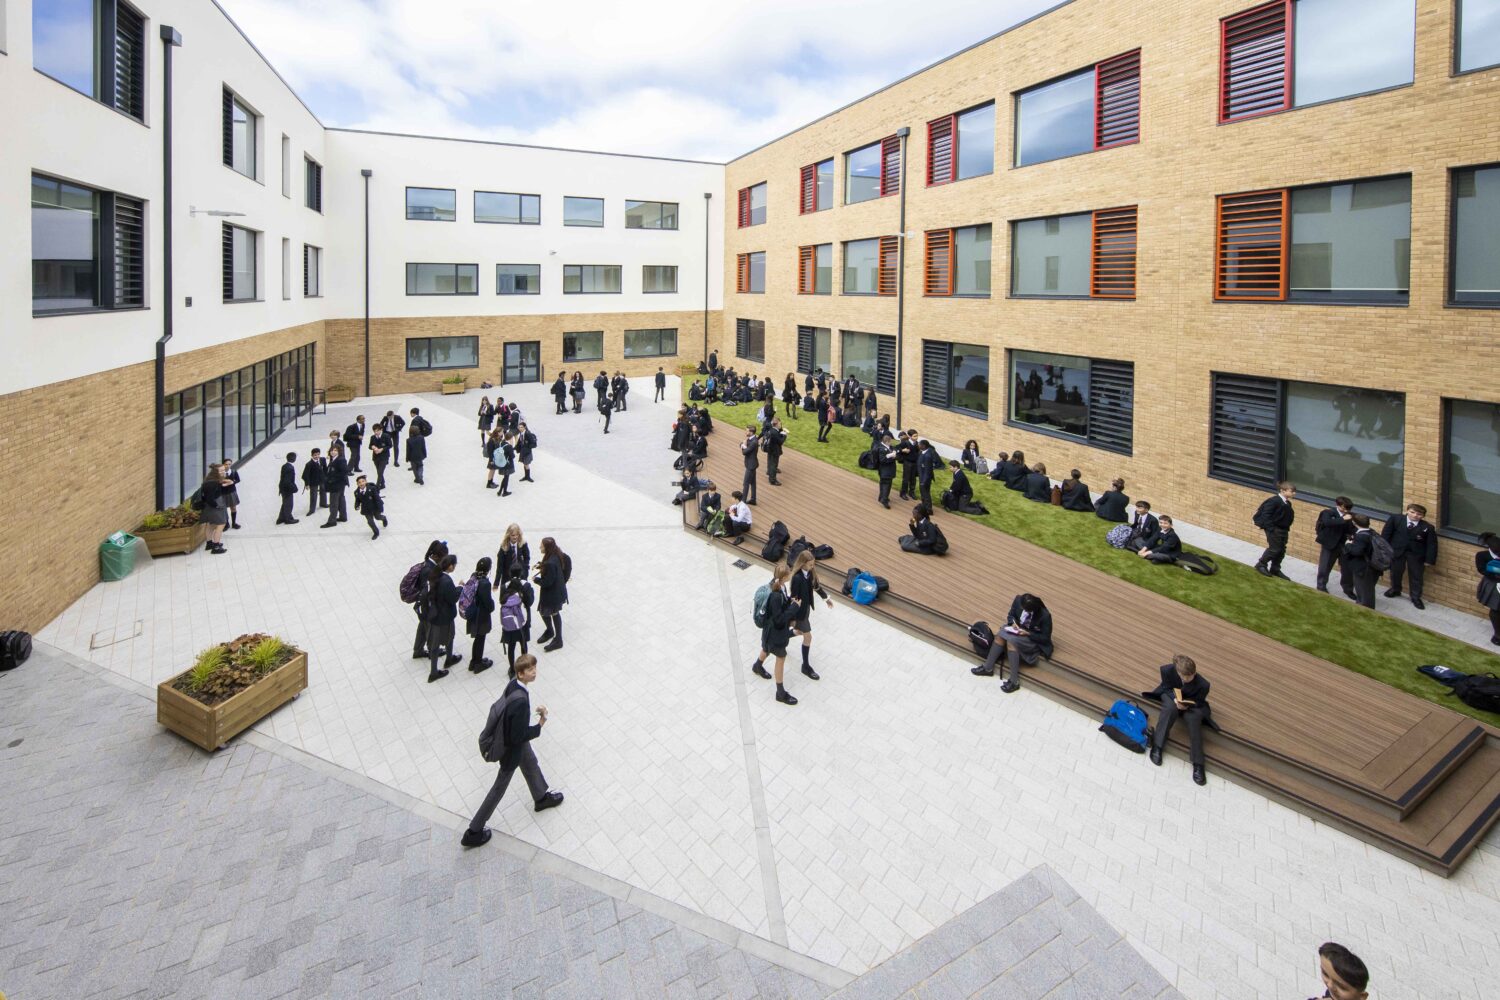 Wide-pan view of outside area with some students walking through, some sitting, some chatting in groups